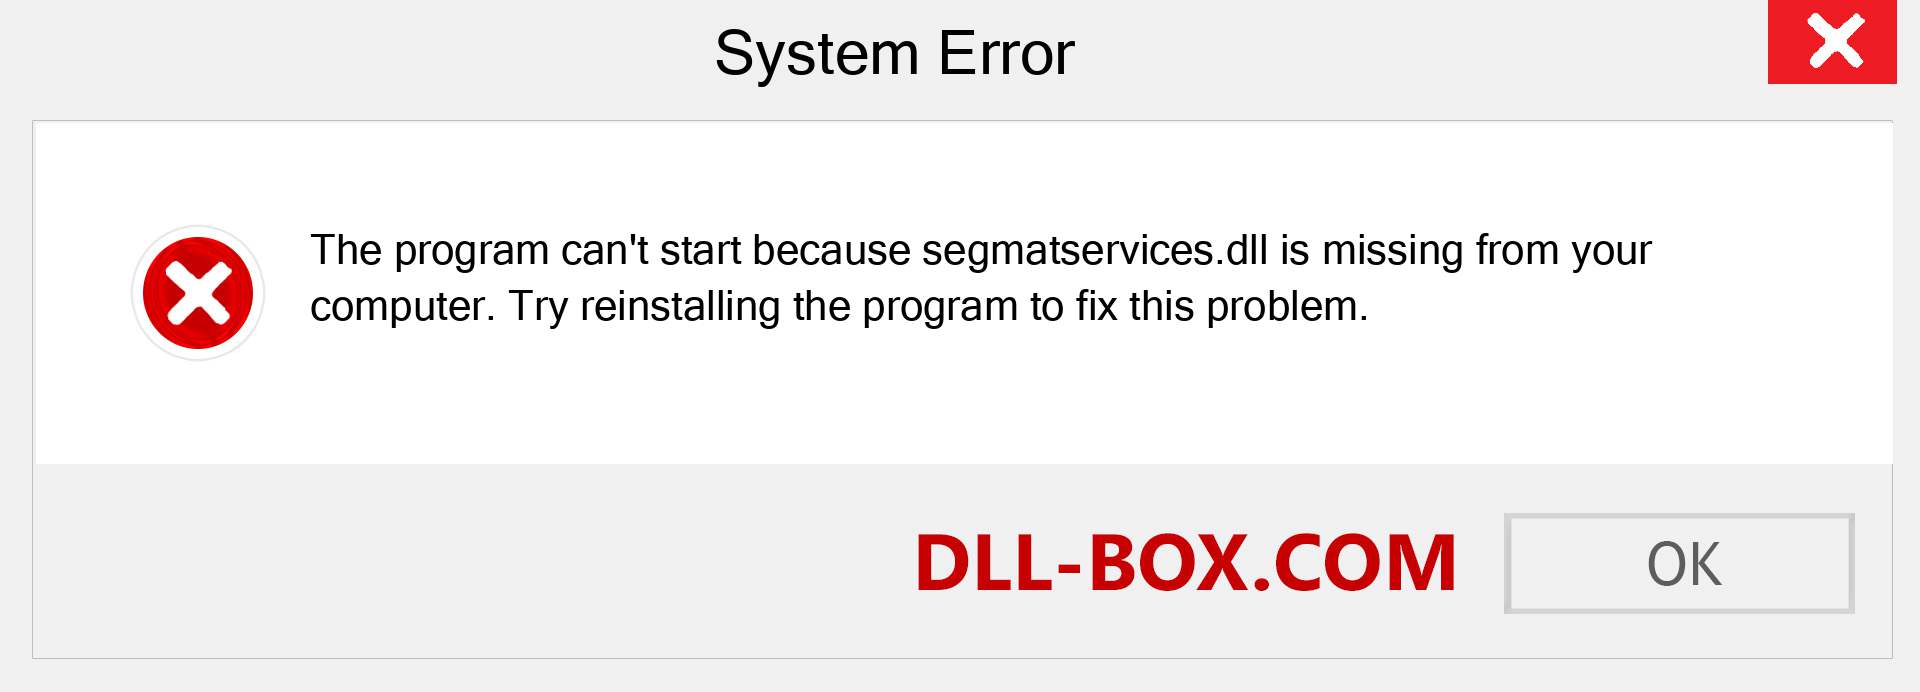  segmatservices.dll file is missing?. Download for Windows 7, 8, 10 - Fix  segmatservices dll Missing Error on Windows, photos, images